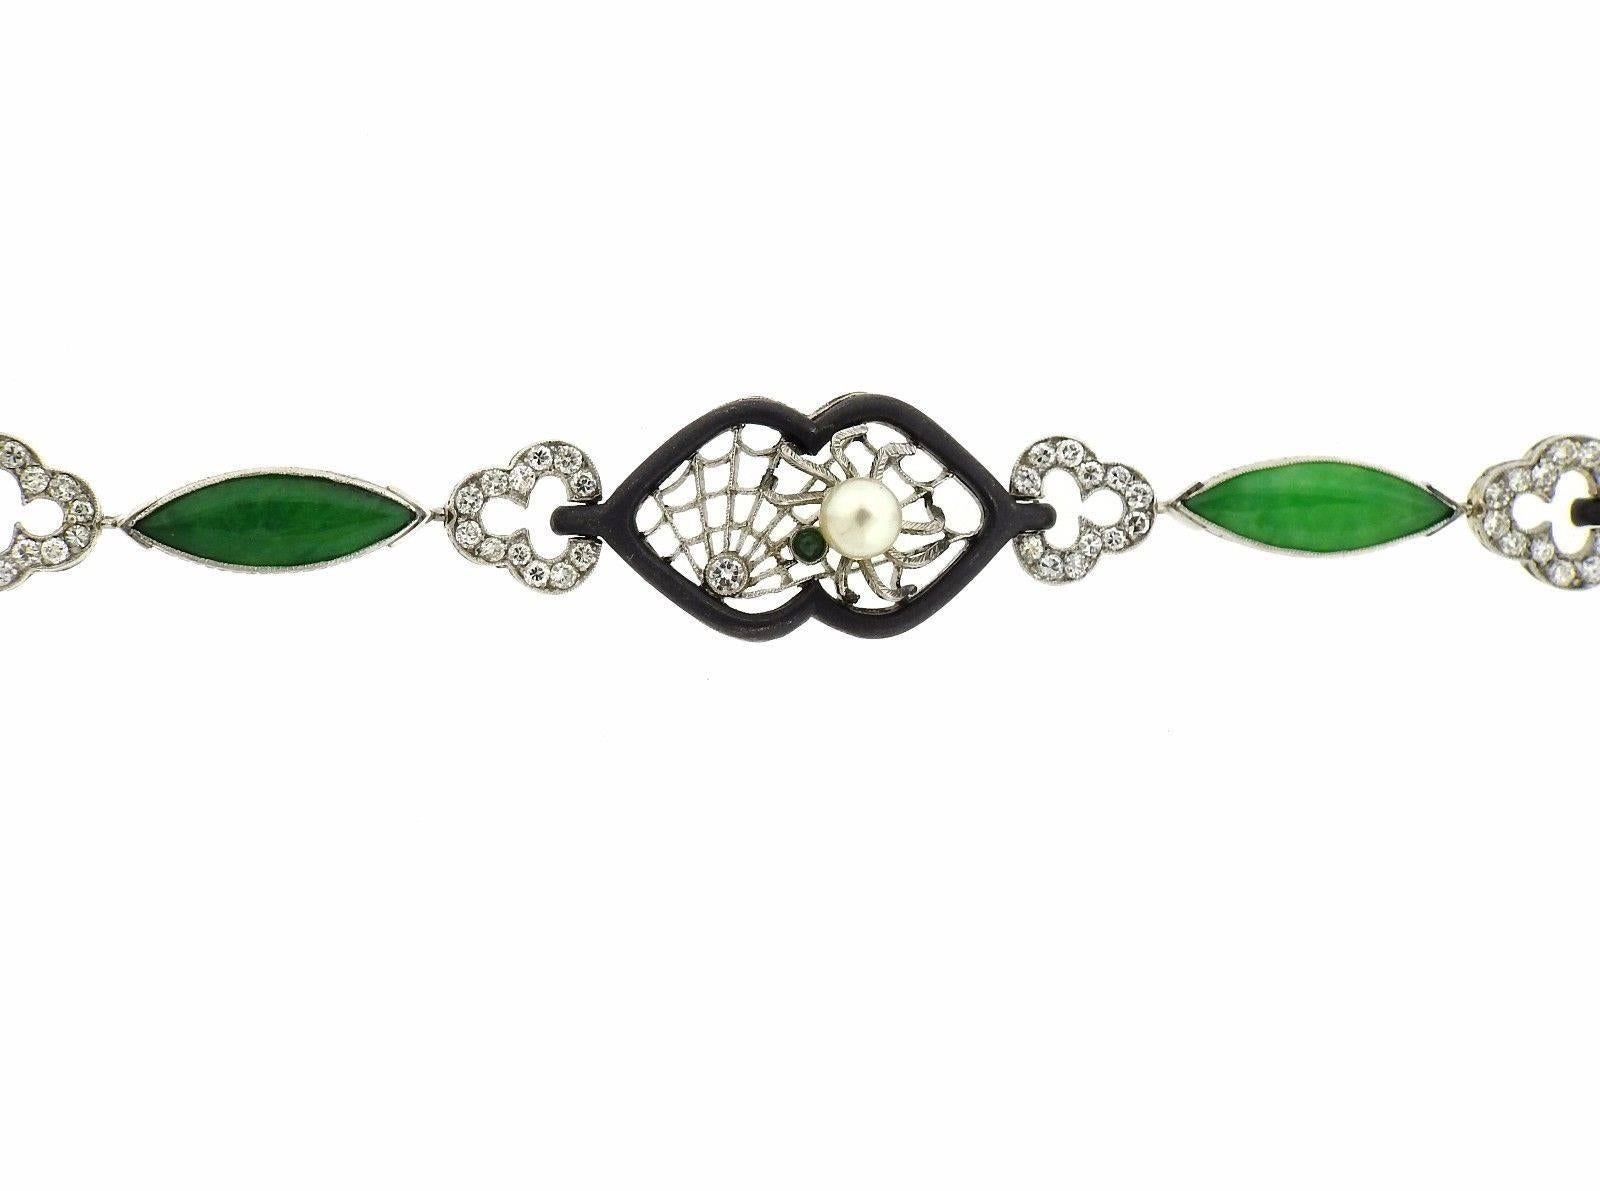 A 14K gold and oxidized steel beacelet set with jadeite, a 5.2mm pearl and approximately 1.40ctw of H/VS diamonds.  The bracelet is 7 3/4